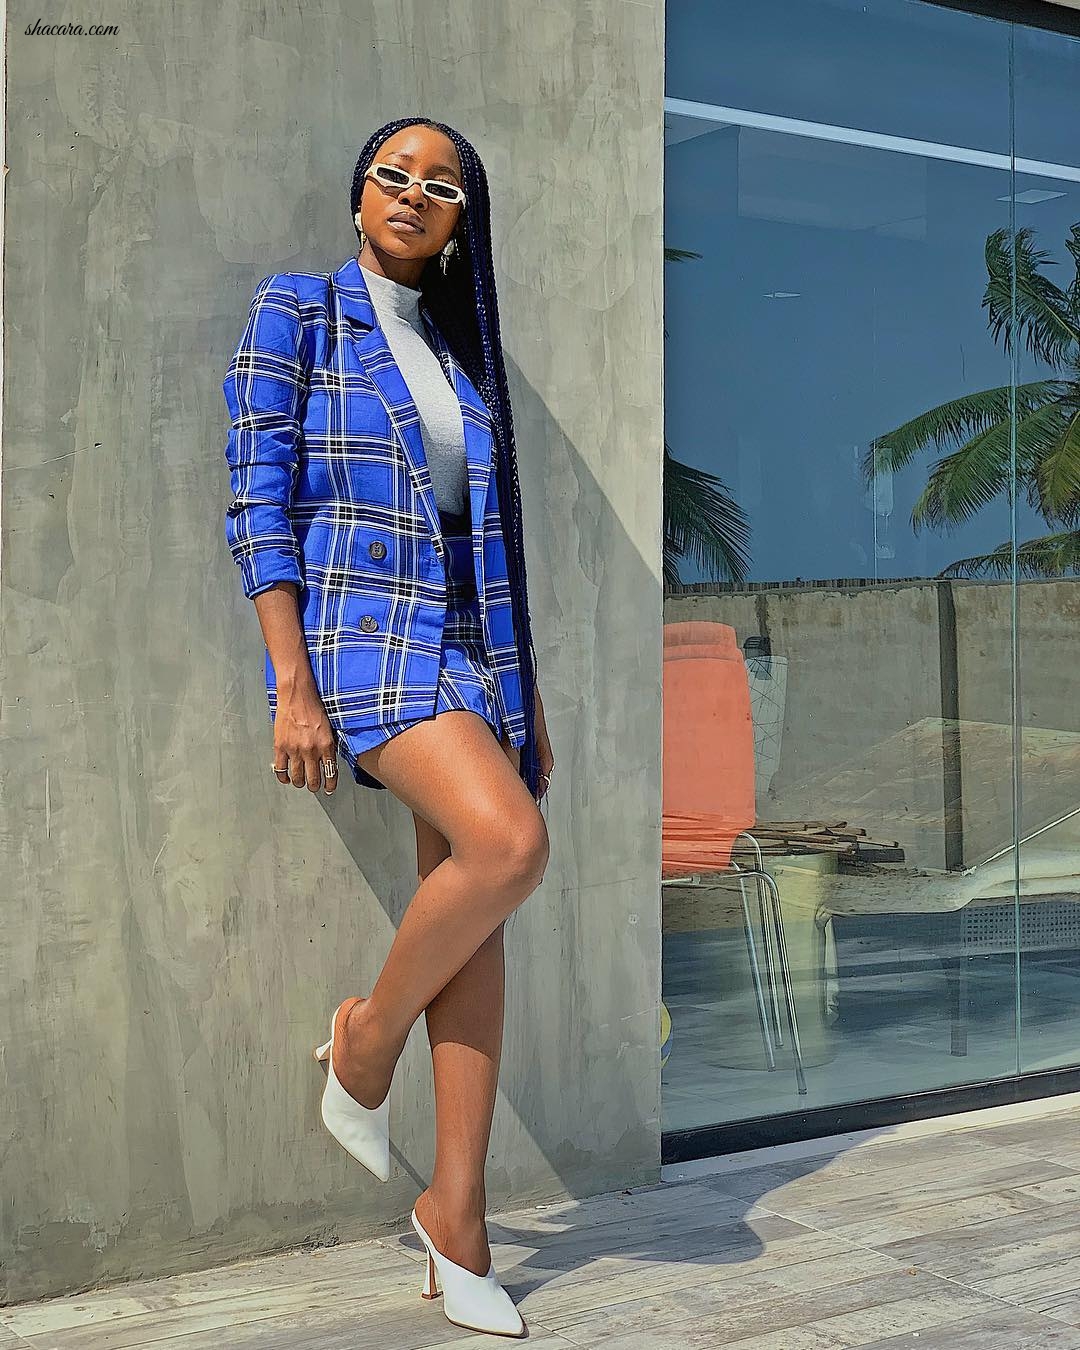 Ini Dima-Okojie Is A Sight For Sore Eyes In This Electric Blue Plaid Look